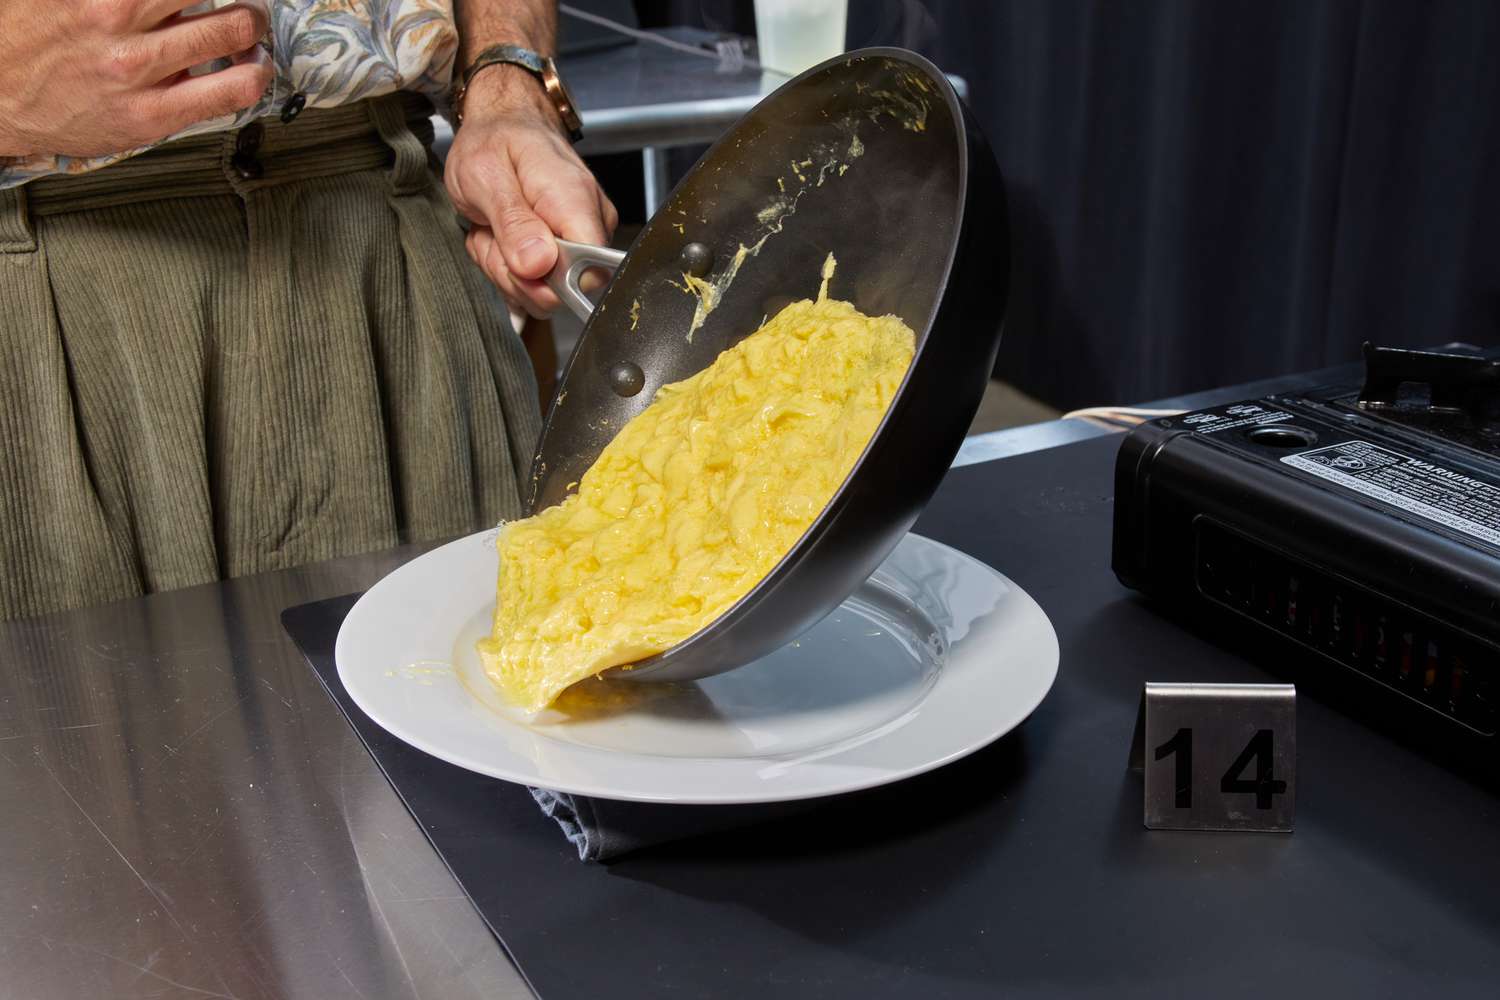 Taking scrambled eggs out of a nonstick frying pan